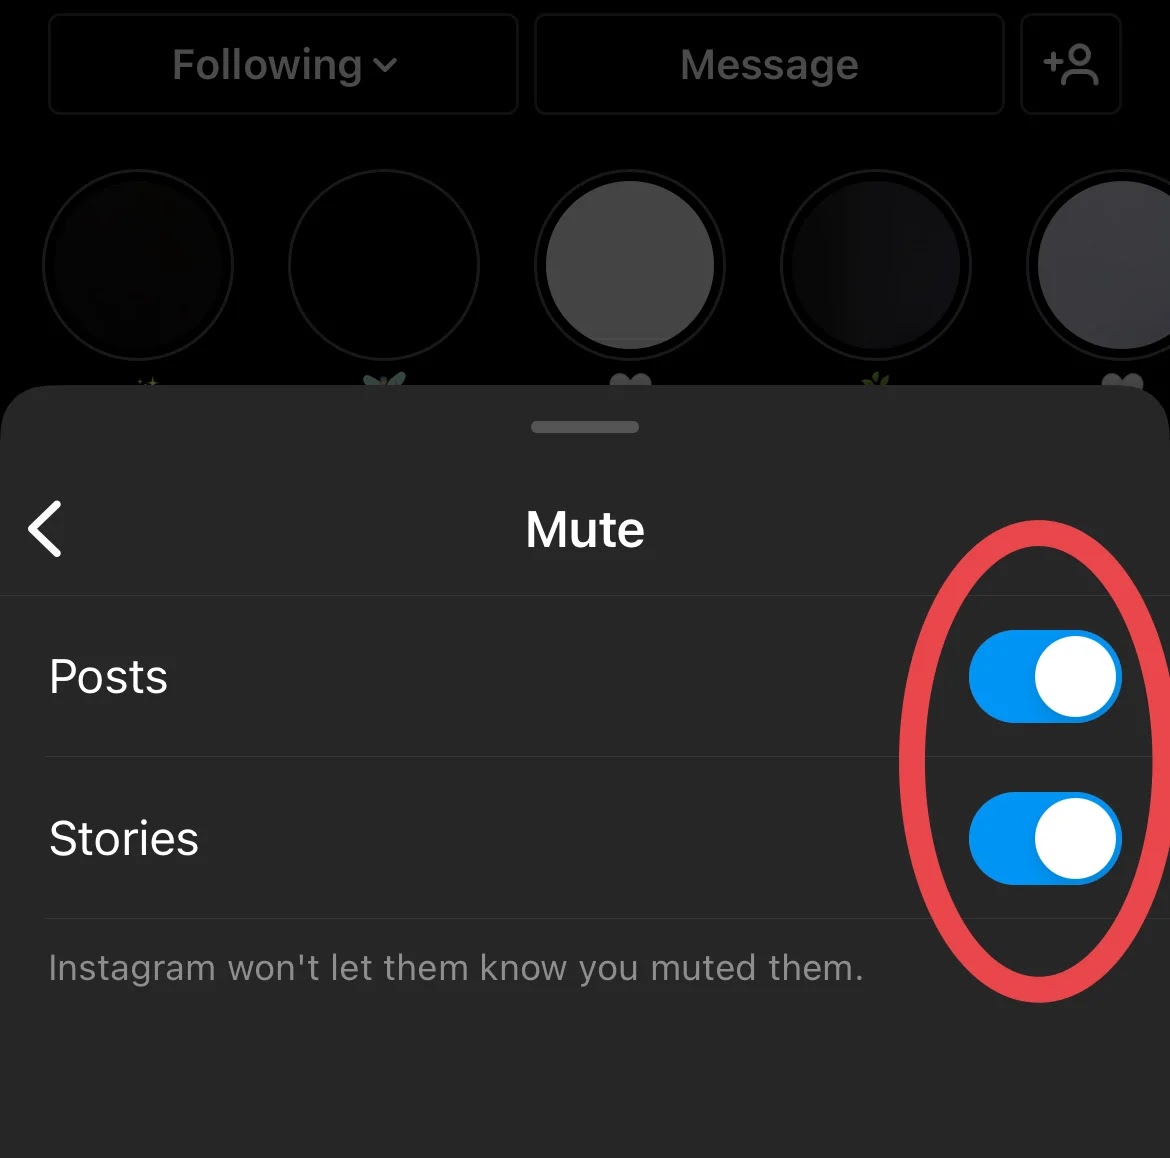 How to mute or unmute that super annoying person on Instagram